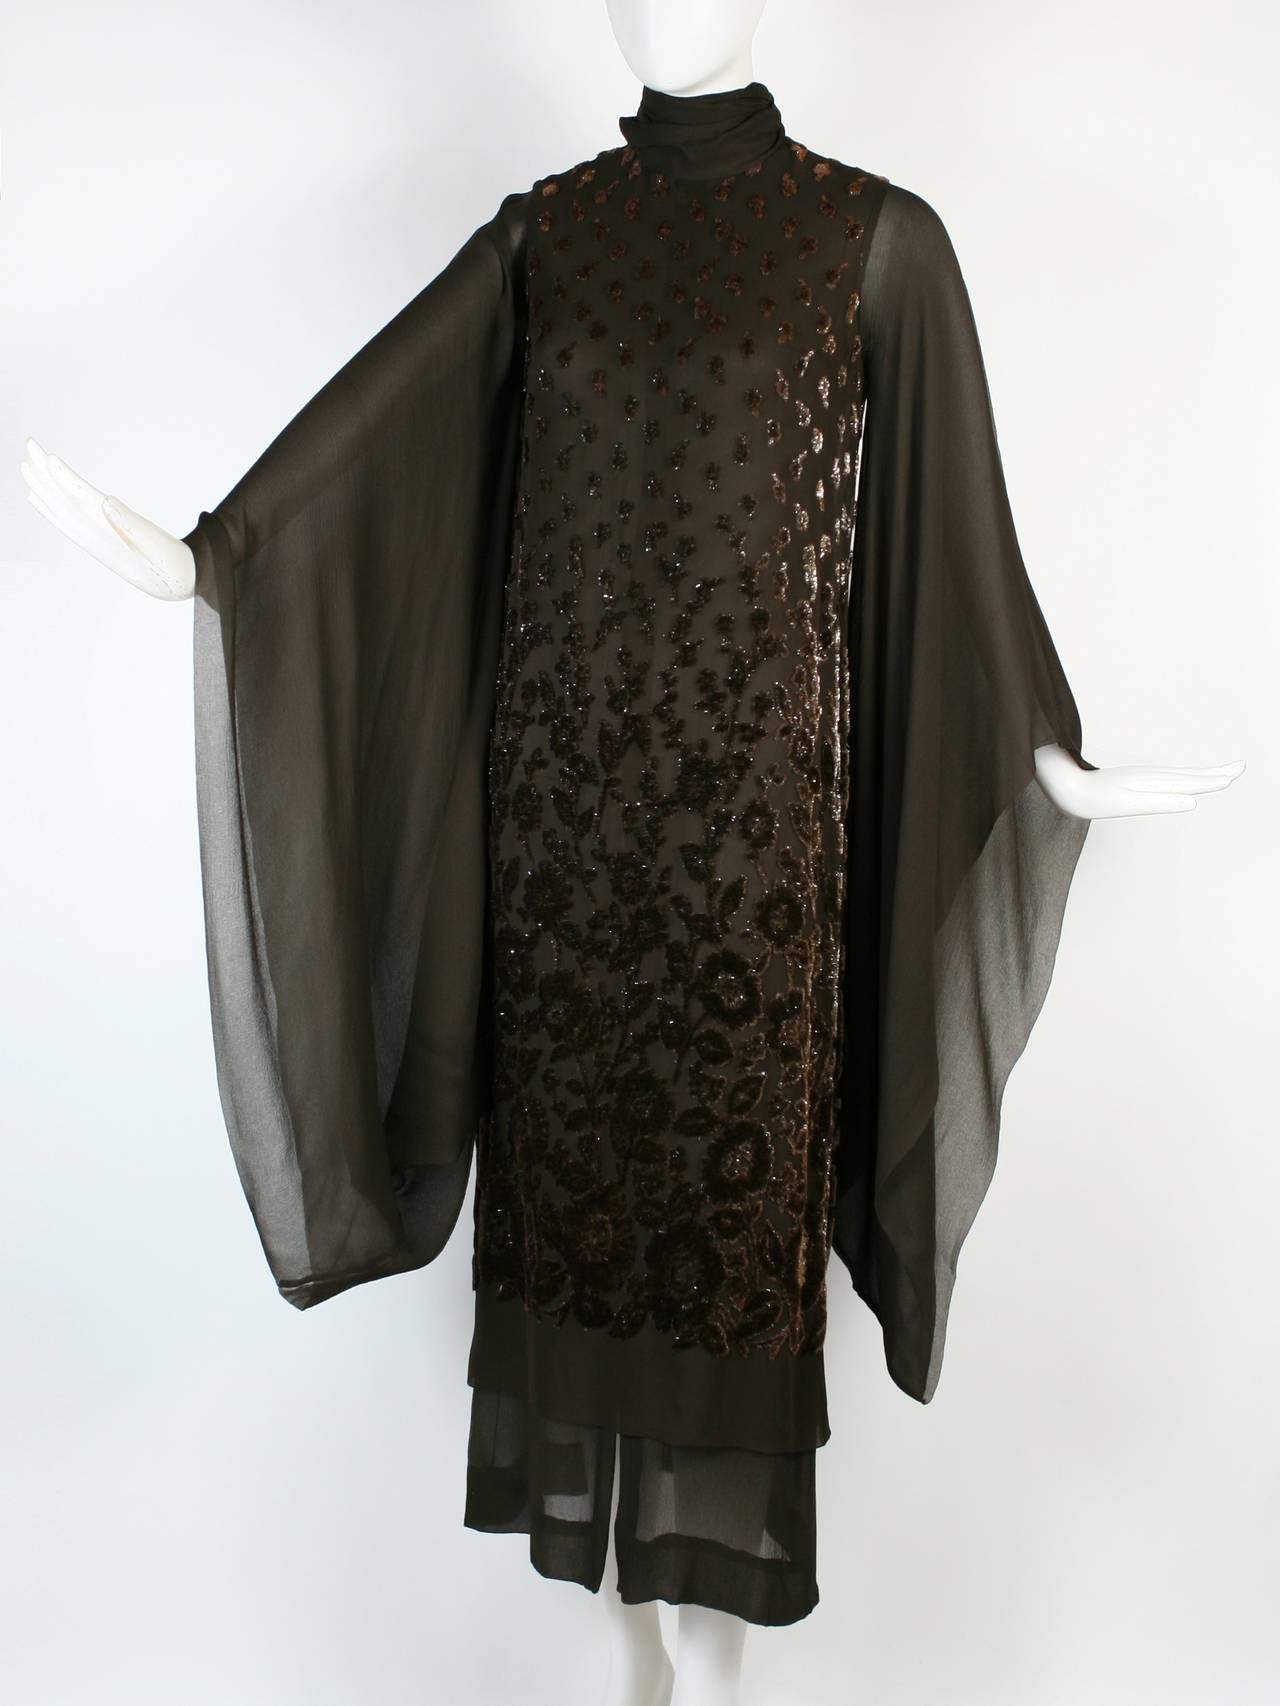 This stunning piece by Christian Dior is everything you would expect from a Haute Couture dress. Dates from 1969. The finest silk chiffon. Incomparable craftsmanship. A gorgeous dark chocolate brown with a devore effect. There is some shimmer in the